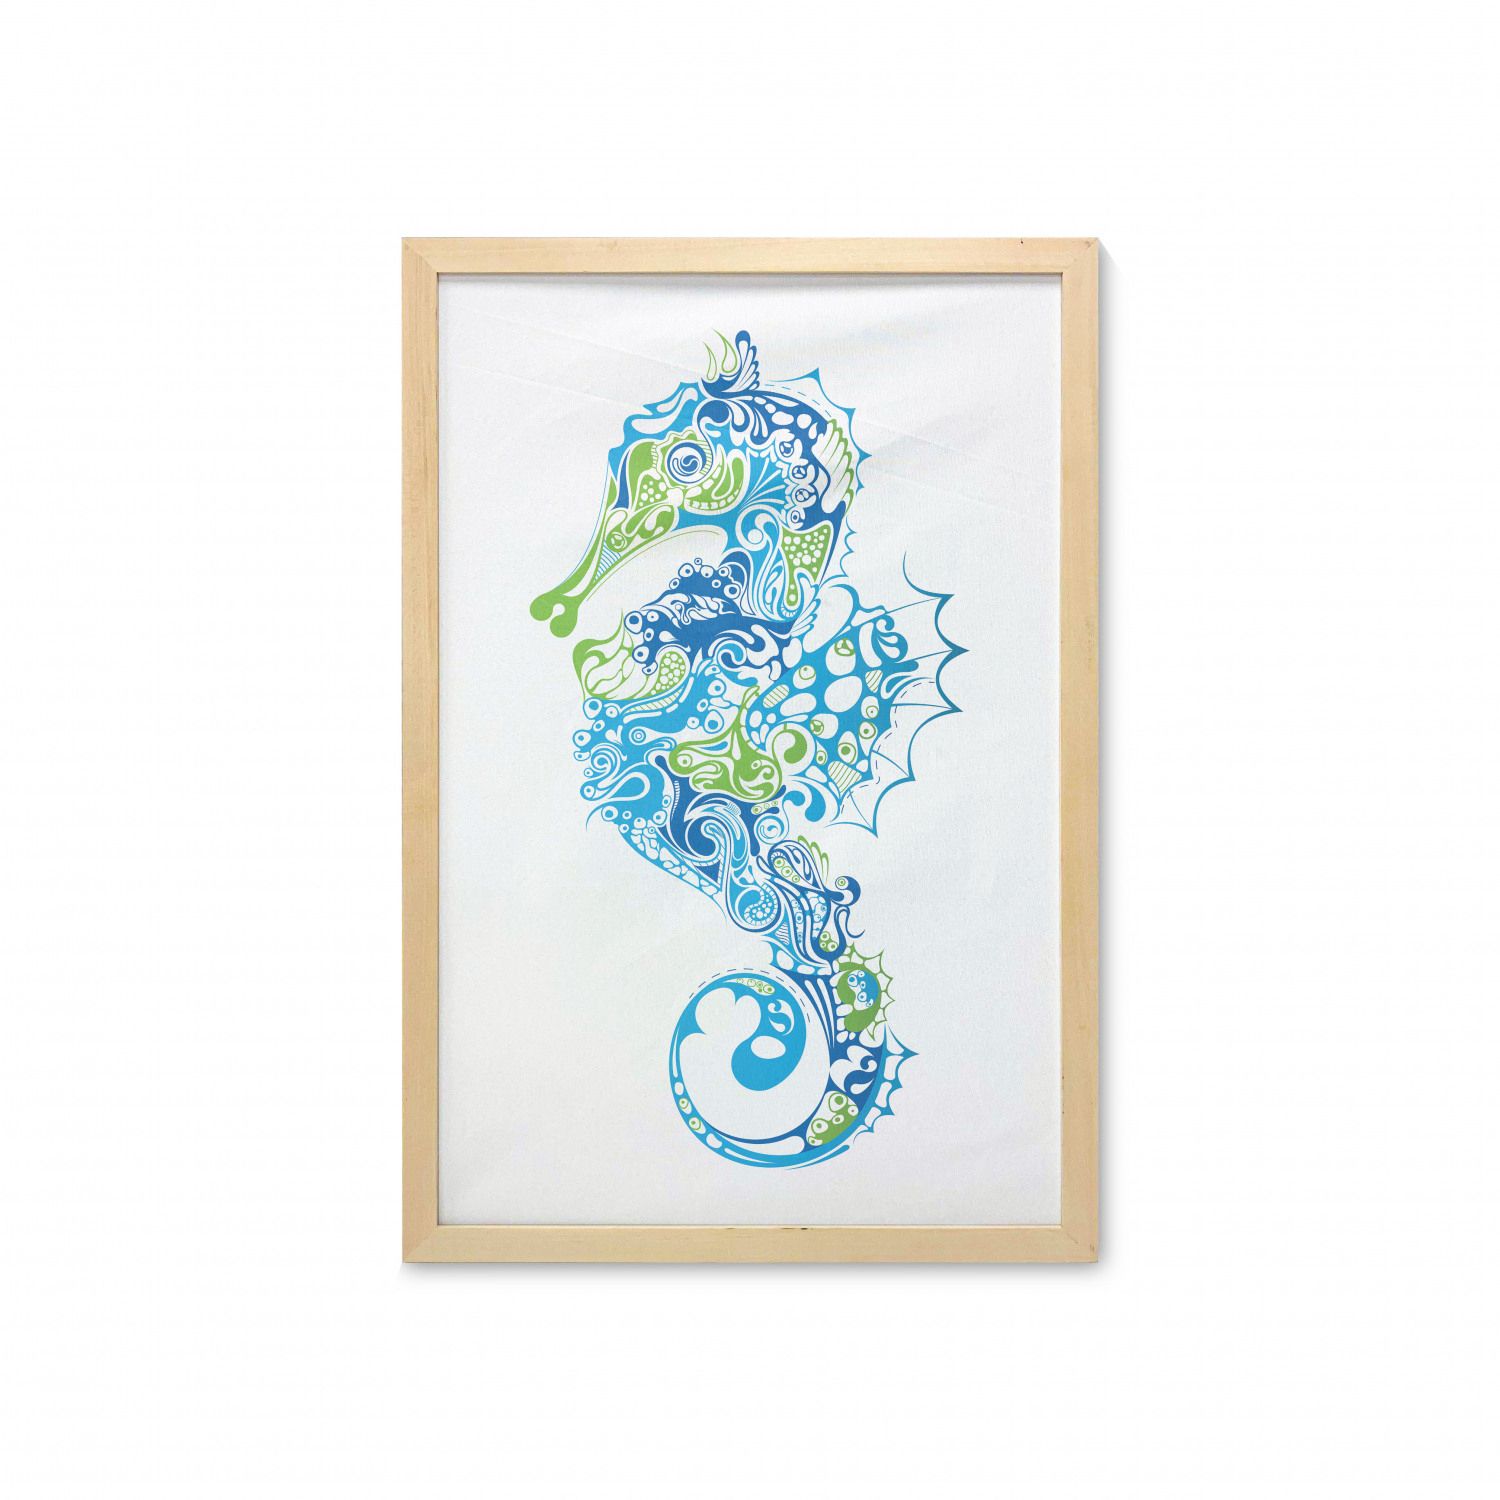 Seahorse Wall Art With Frame, Seahorse Design With Abstract Curvy And Wavy  Geometric Forms, Printed Fabric Poster For Bathroom Living Room Dorms, 23"  X 35", Lime Green Night Blue,ambesonne – With Regard To Current Seahorse Wall Art (View 10 of 20)